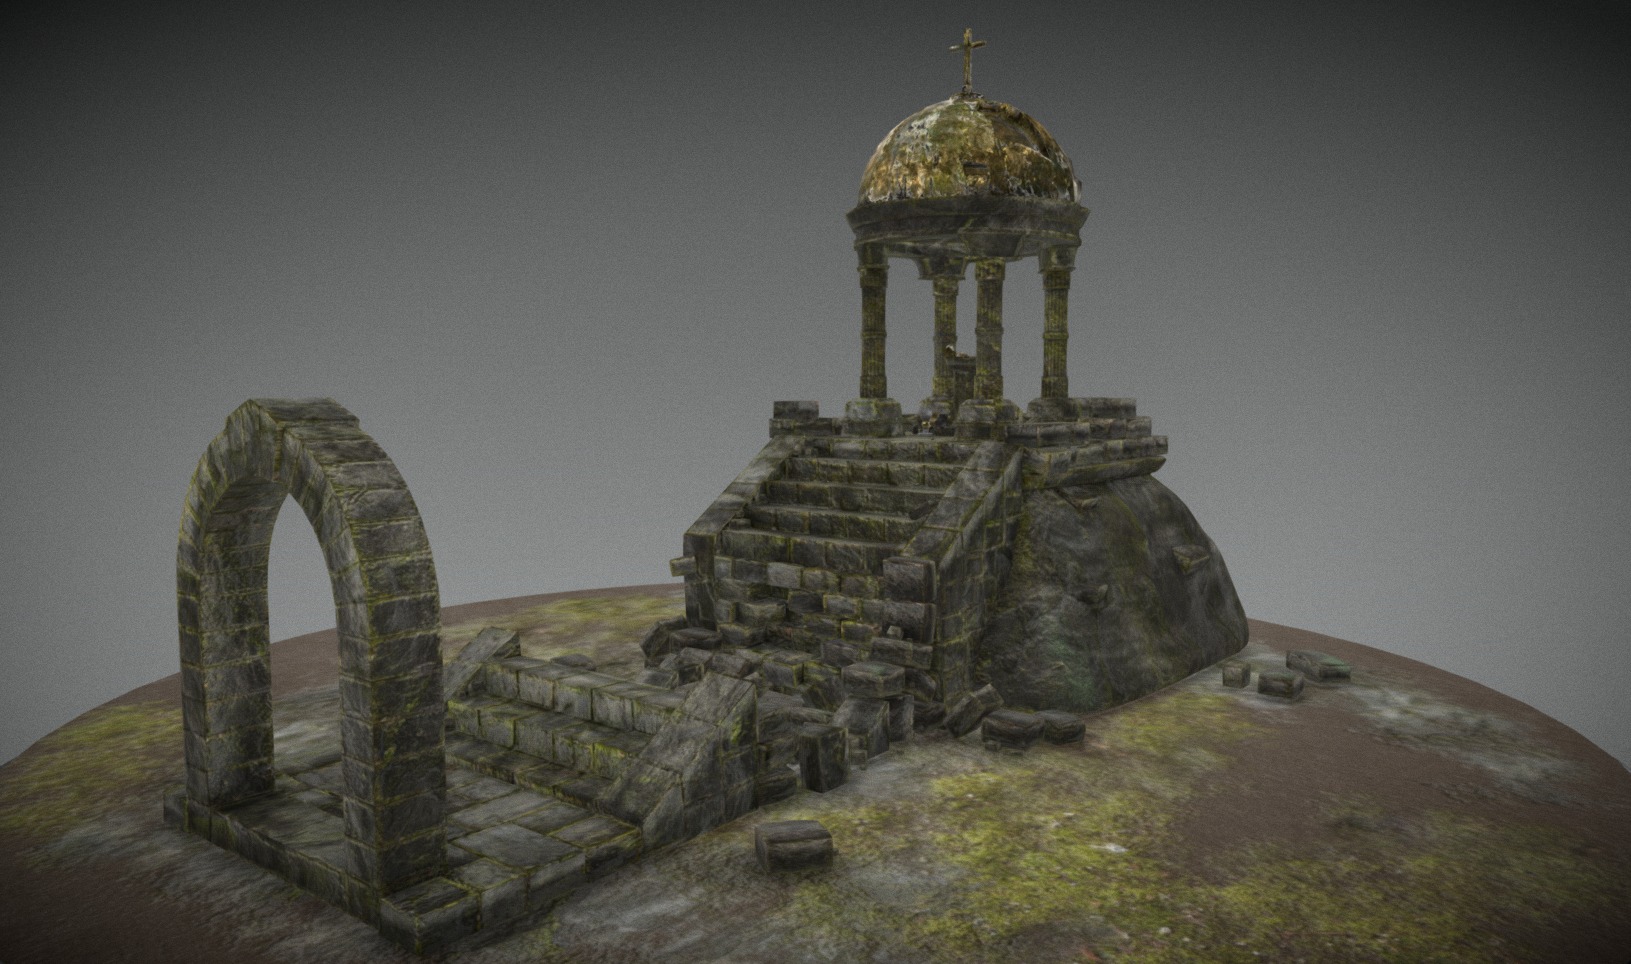 3d modelled ruin diorama inspired by Tomb Raider and Uncharted 3d model